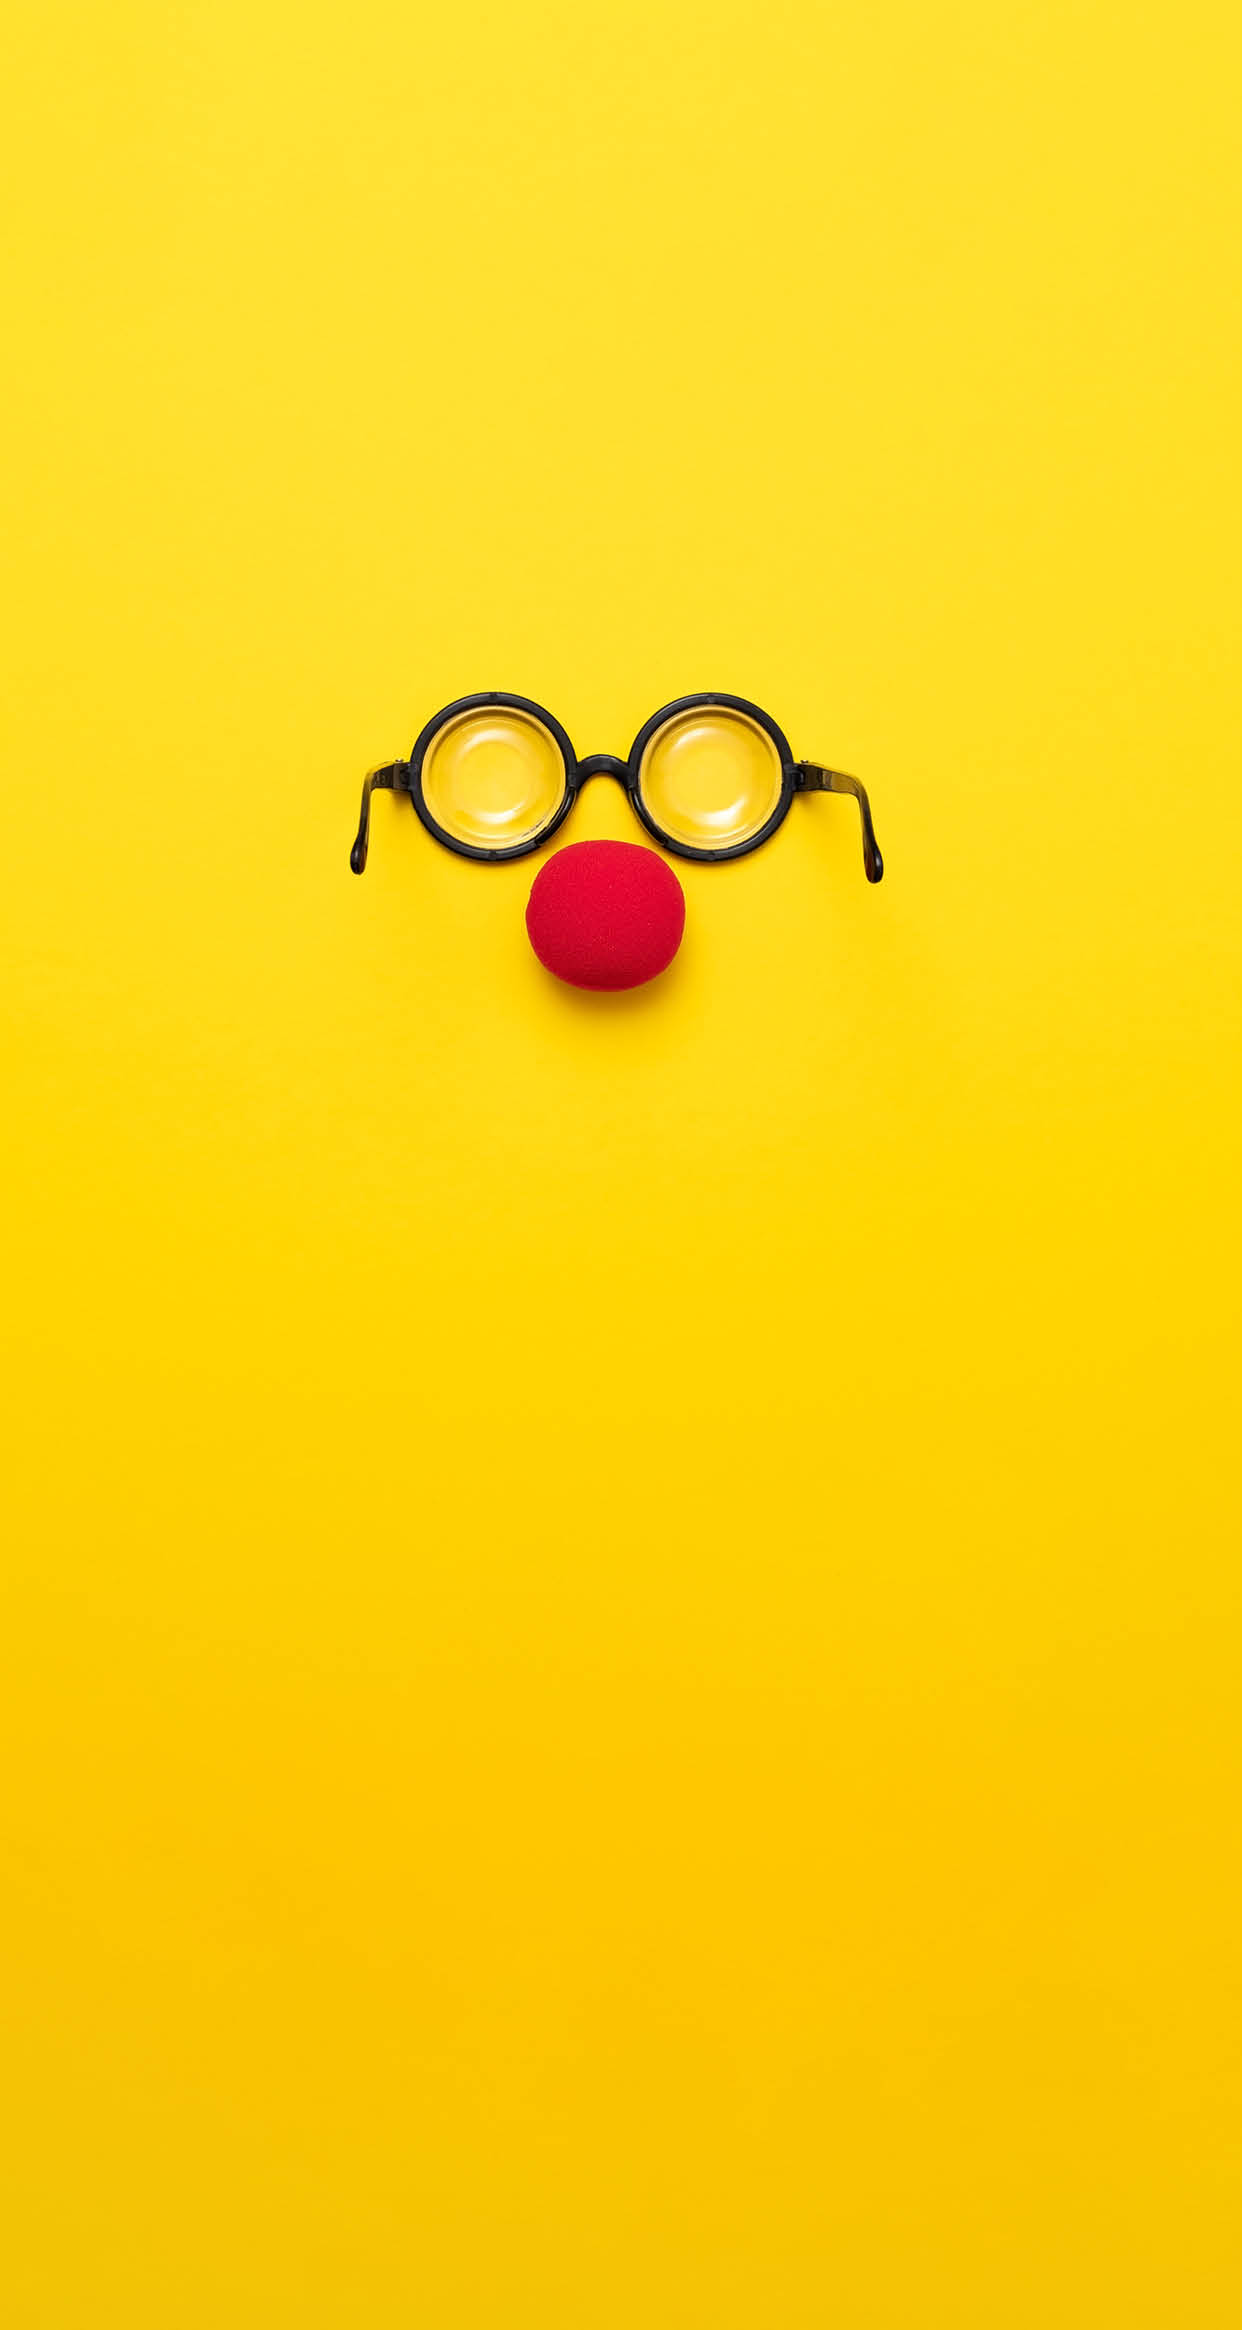 Funny glasses, a red clown nose and tie on a colored background, like a face  Flat lay  Funny costume for the holidays  Anonymous concept 